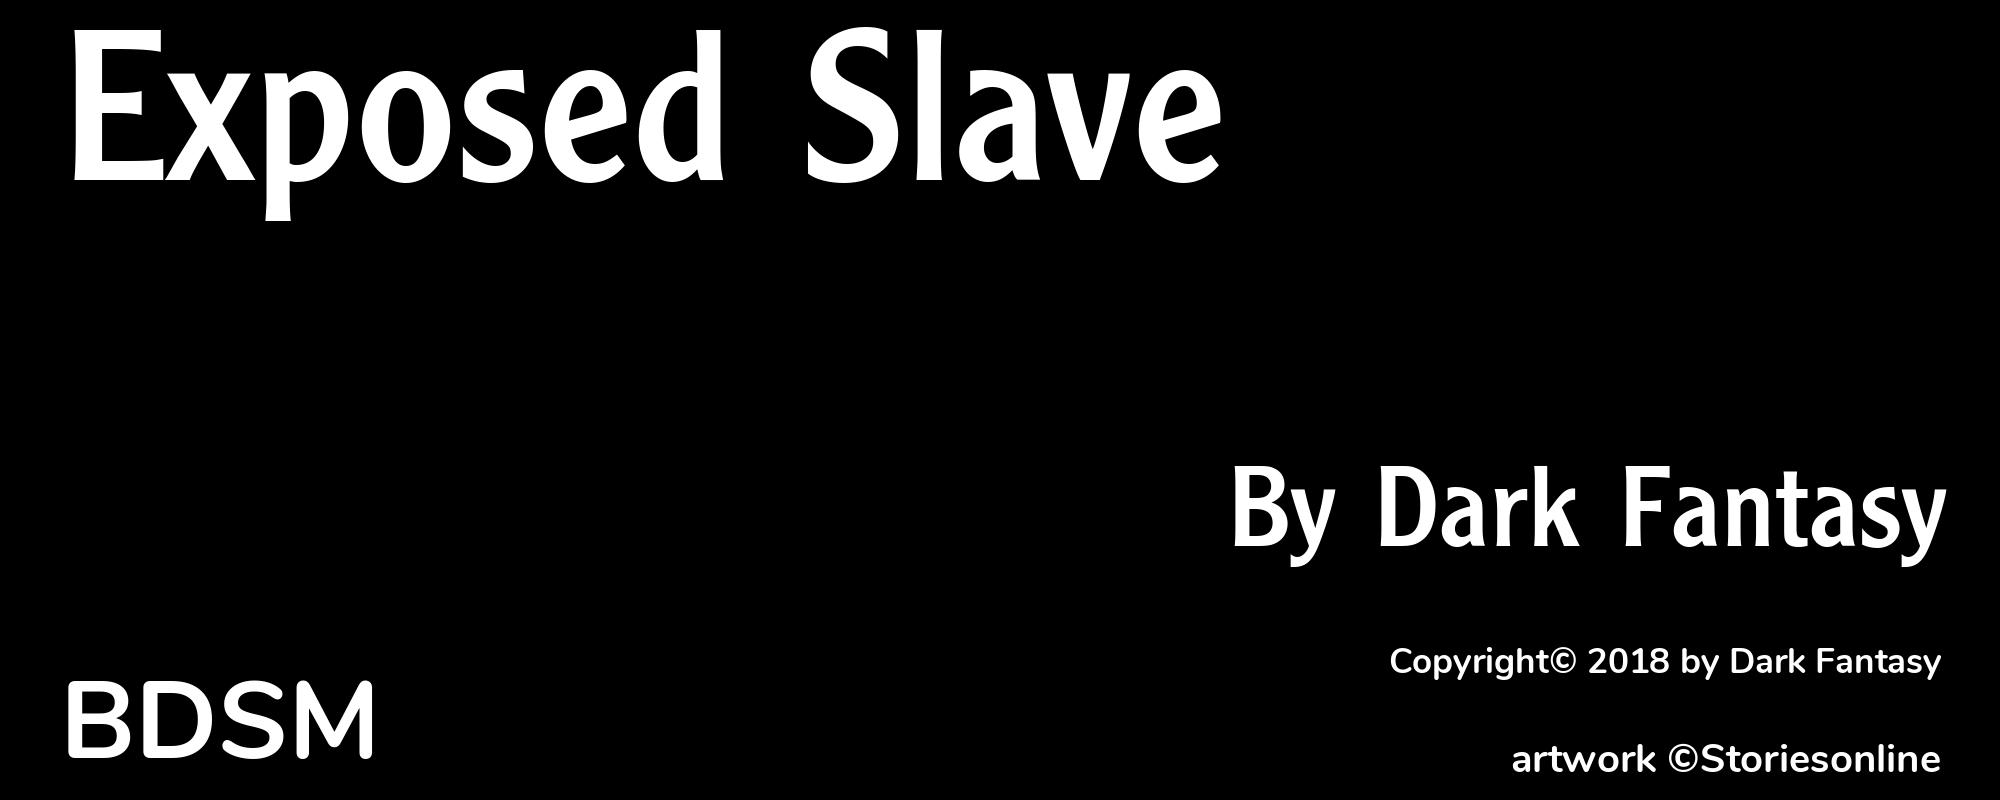 Exposed Slave - Cover